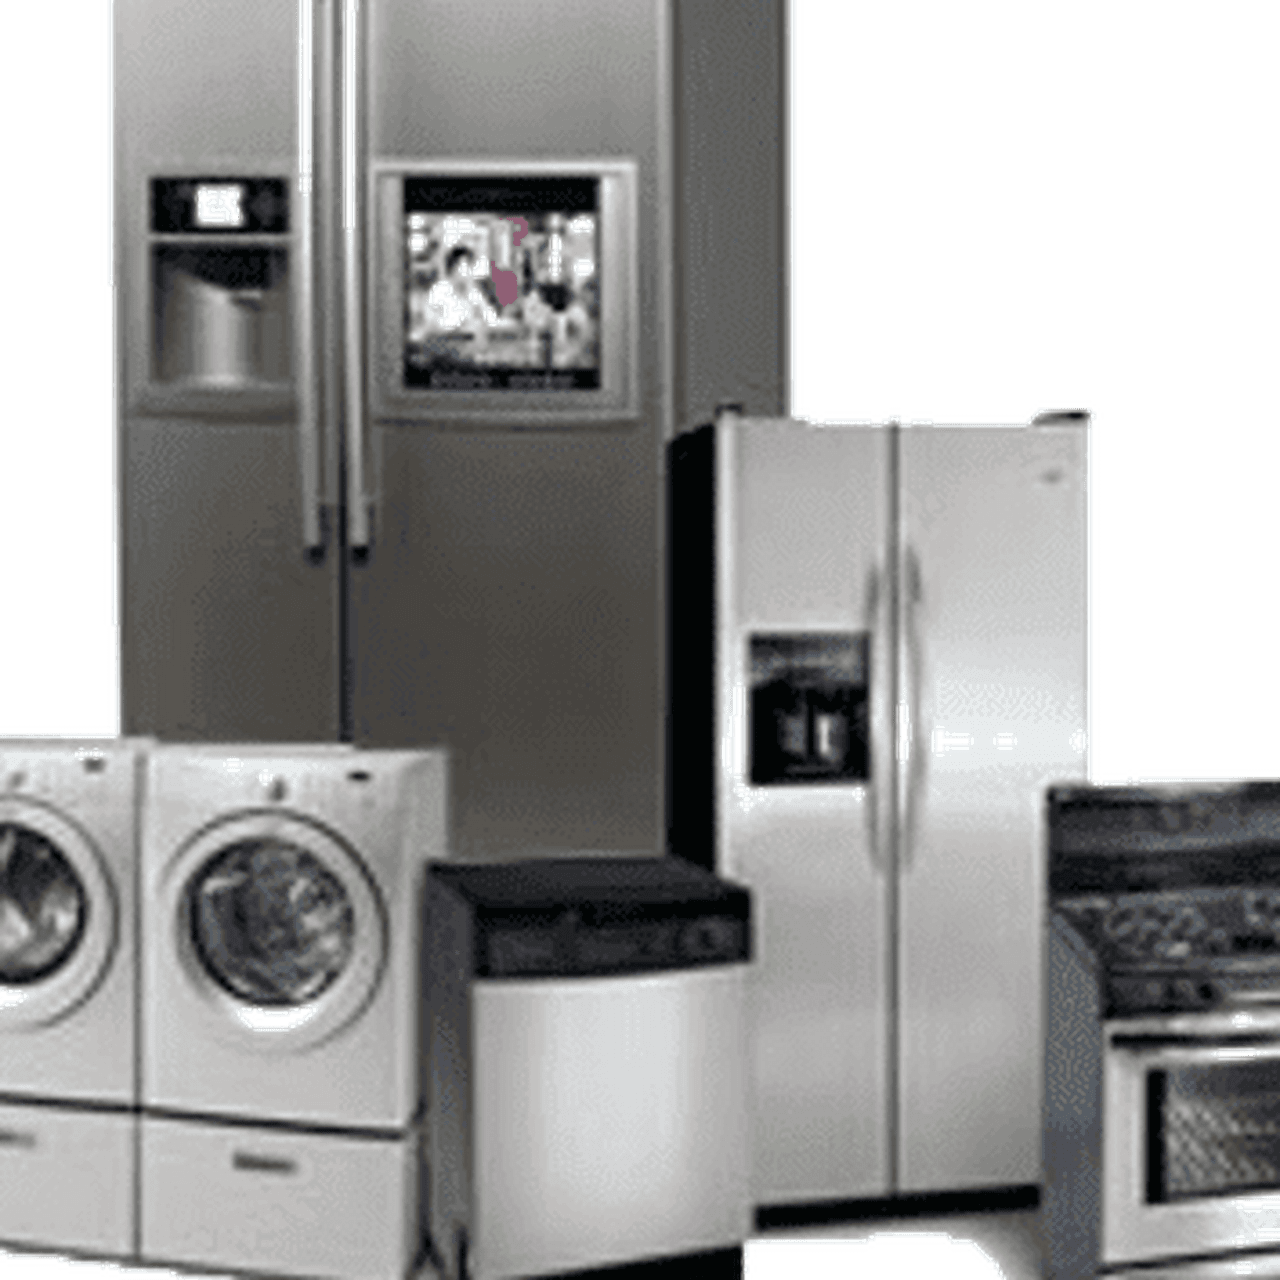 Knowing When To Repair and When to Replace Your Appliances